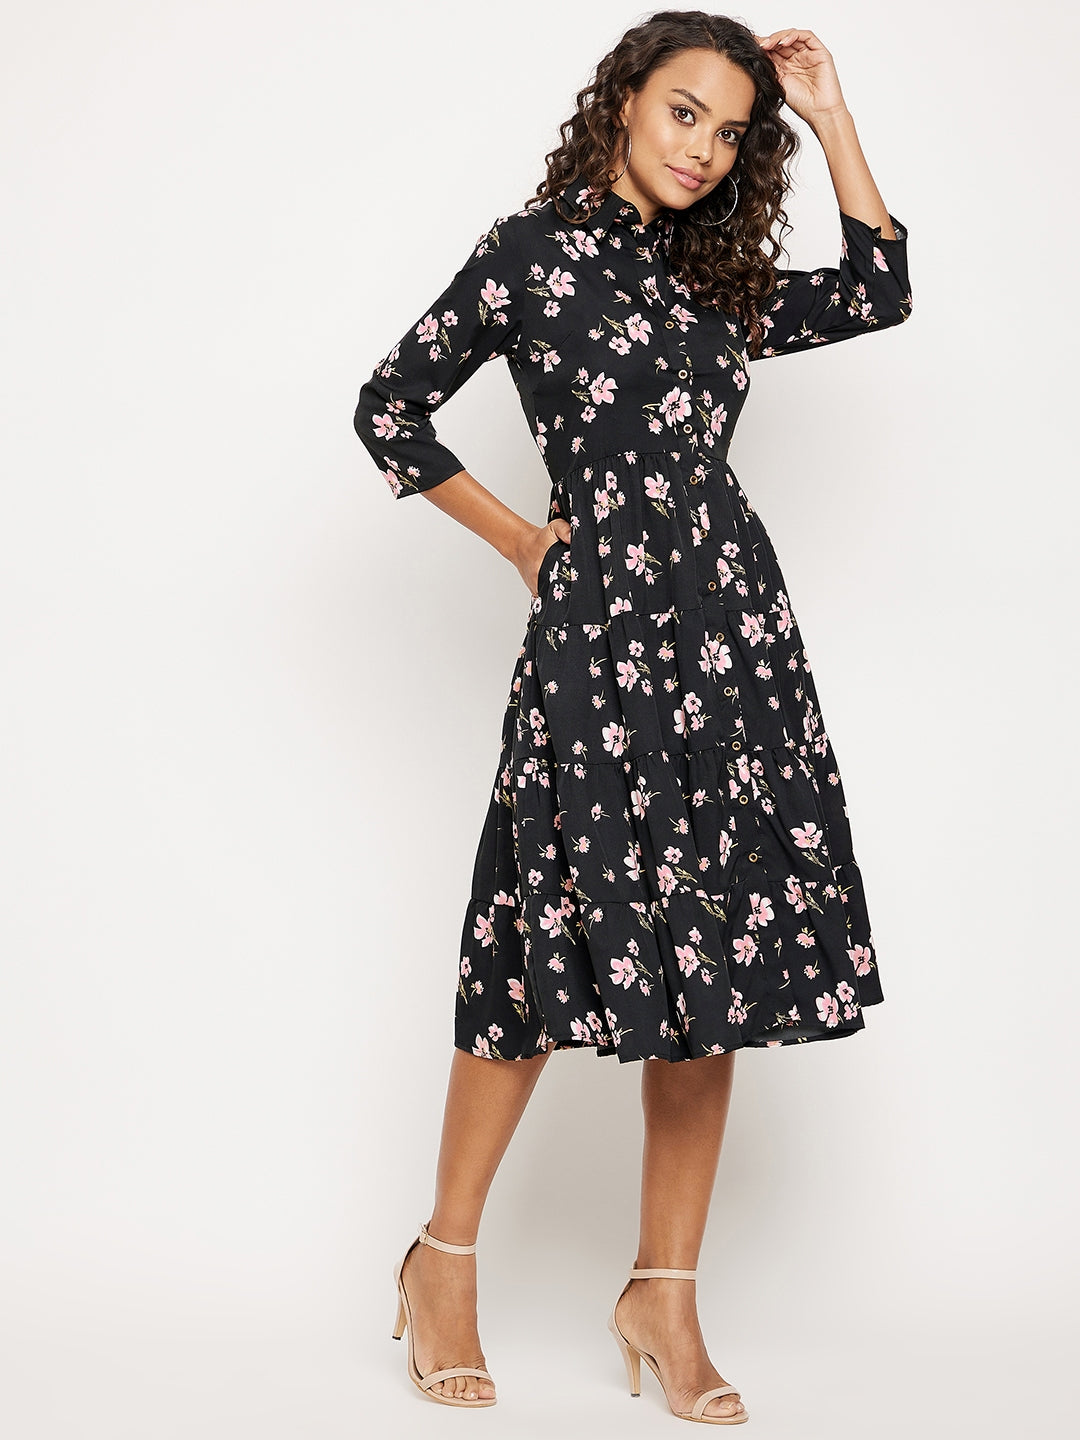 Printed Fit & Flare Skater Dress - Uptownie